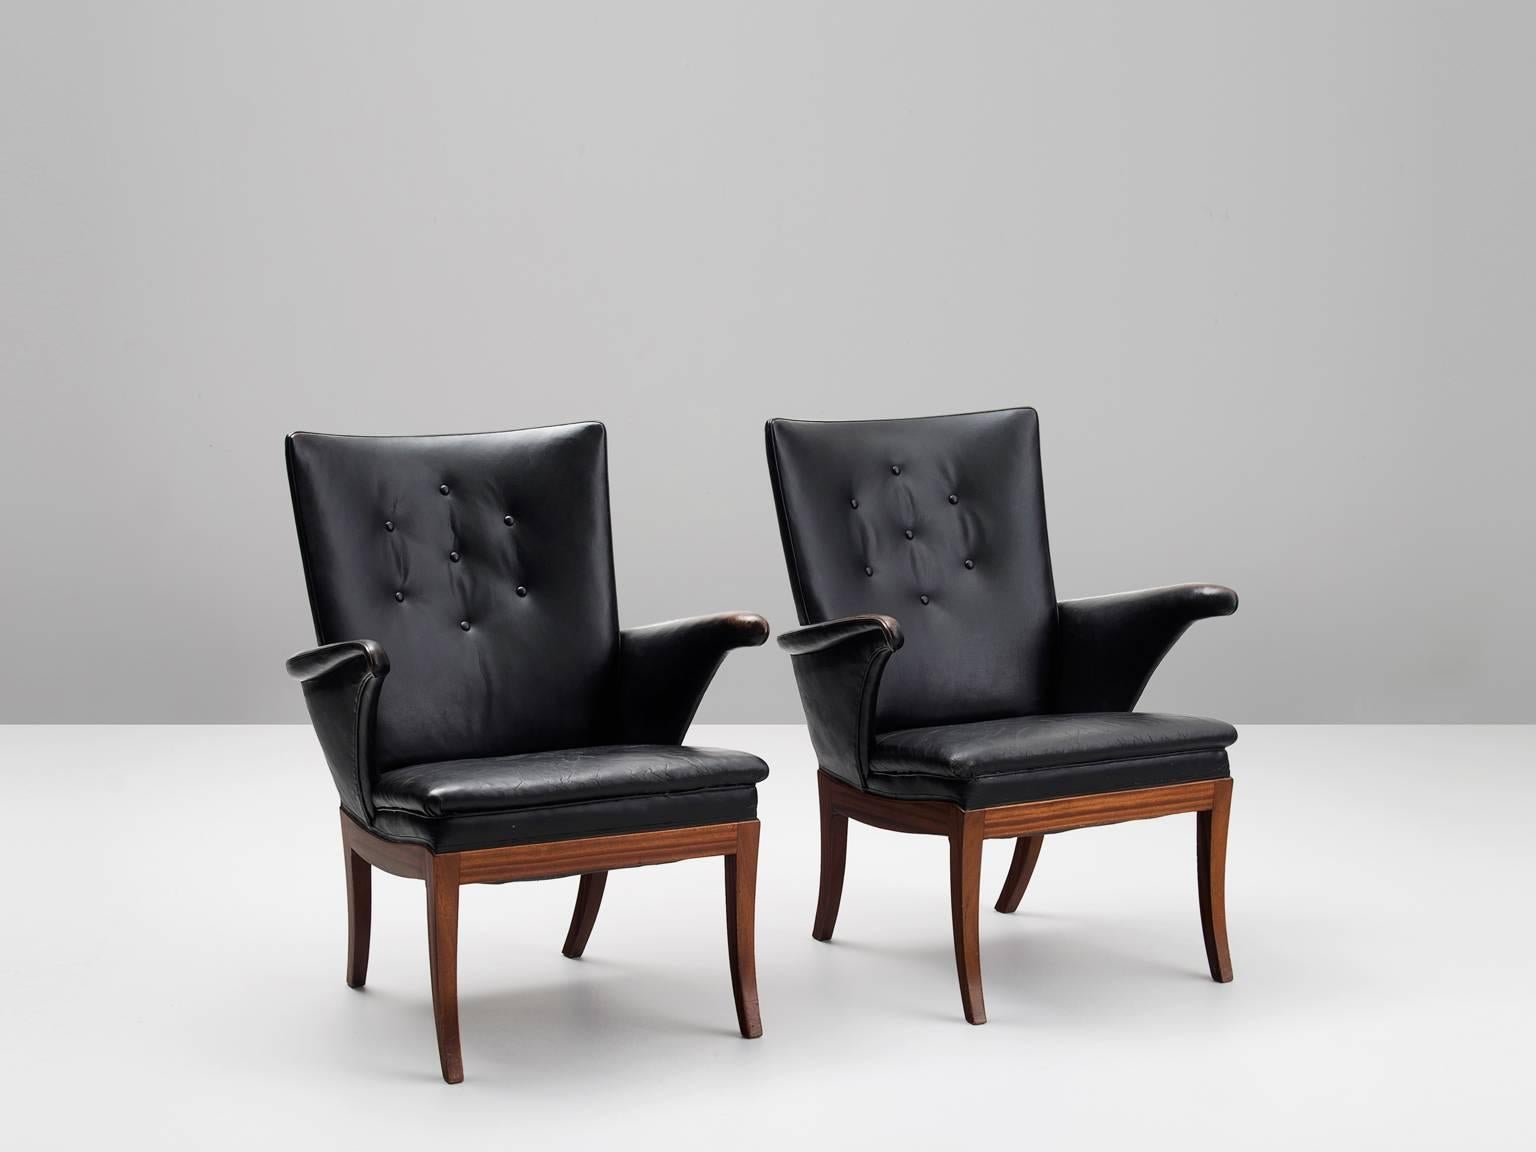 Frits Henningsen, pair of black leather armchairs, Denmark 1932.

This pair of comfortable lounge chairs was designed and produced by master cabinet maker Frits Henningsen (1989-1965) in circa 1932. The remarkably well-crafted pair shows the